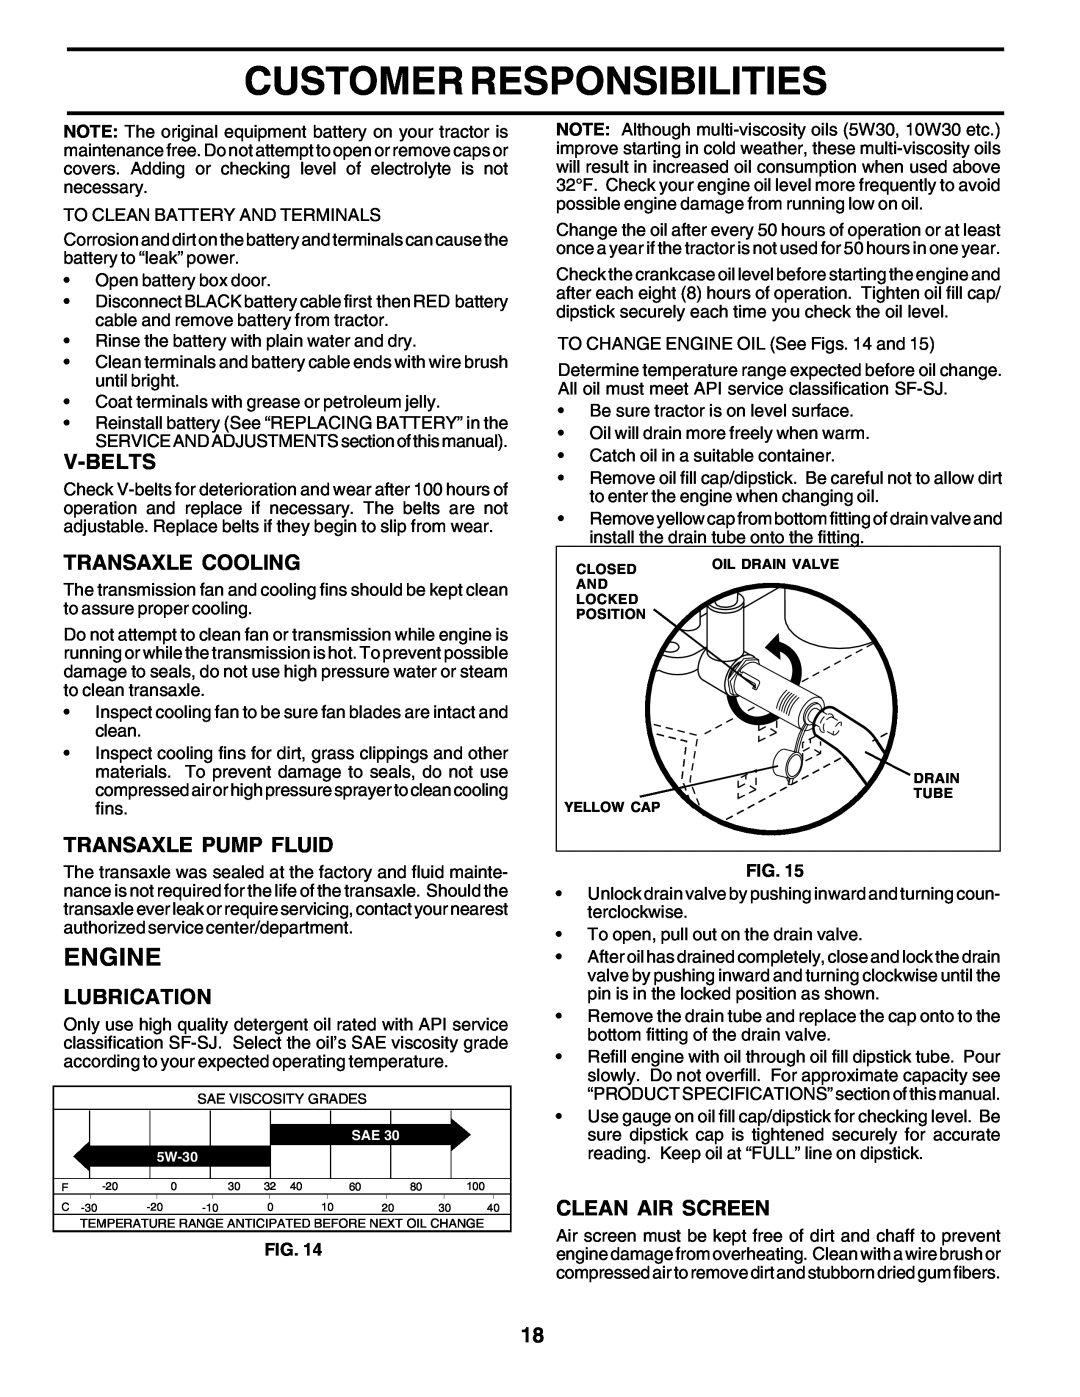 Poulan 180002 owner manual Engine, Customer Responsibilities, V-Belts, Transaxle Cooling, Transaxle Pump Fluid, Lubrication 